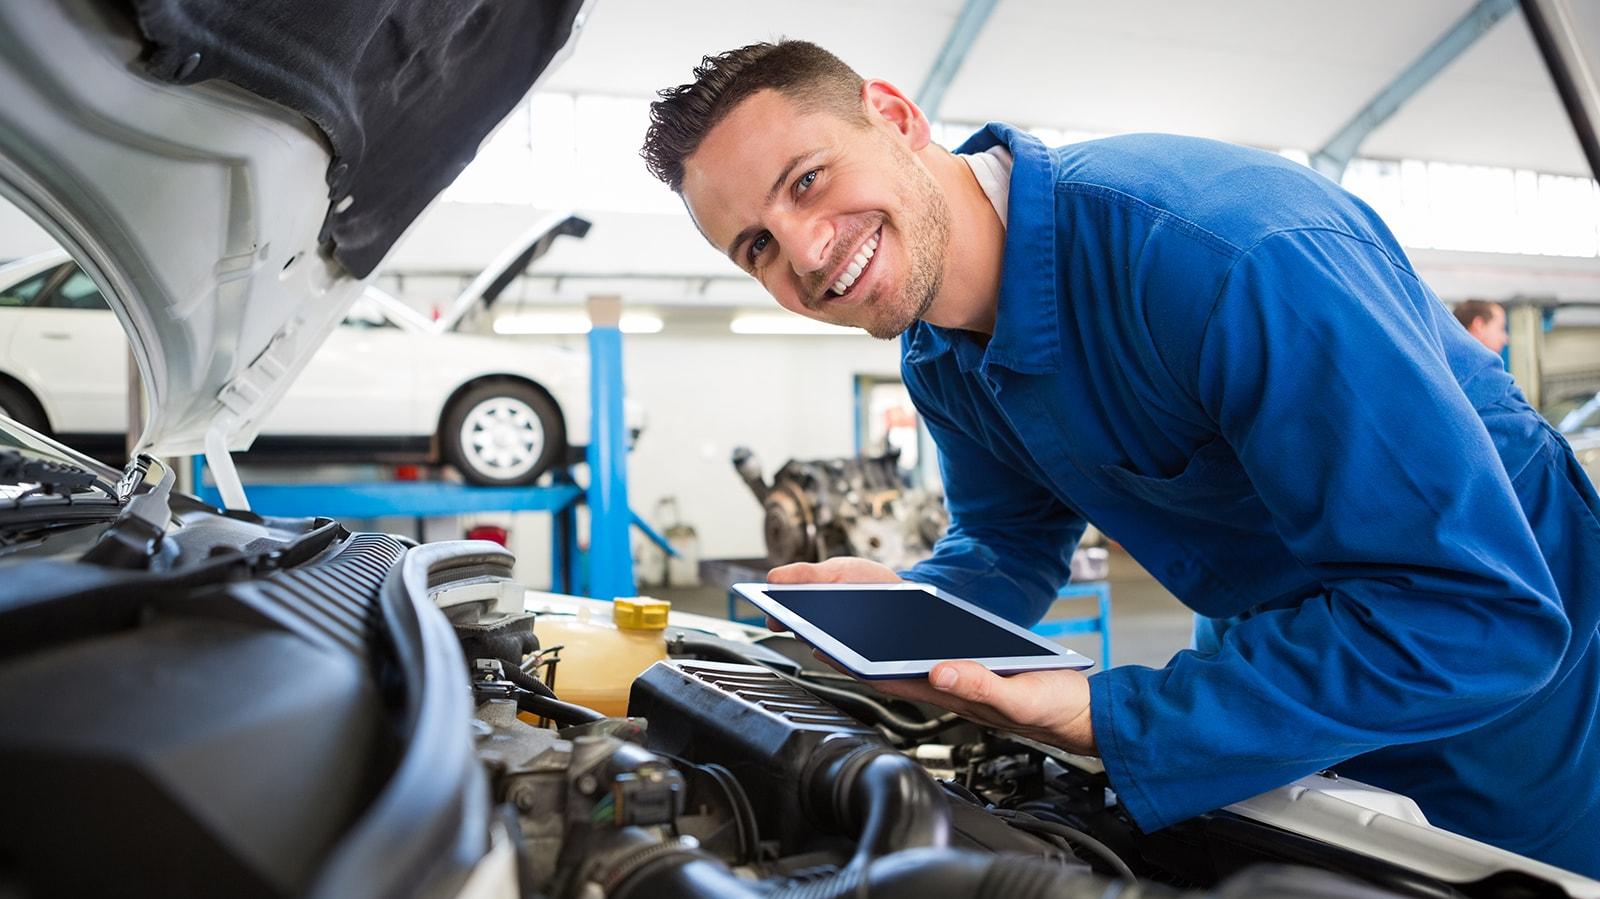 Smiling service mechanic working on an engine